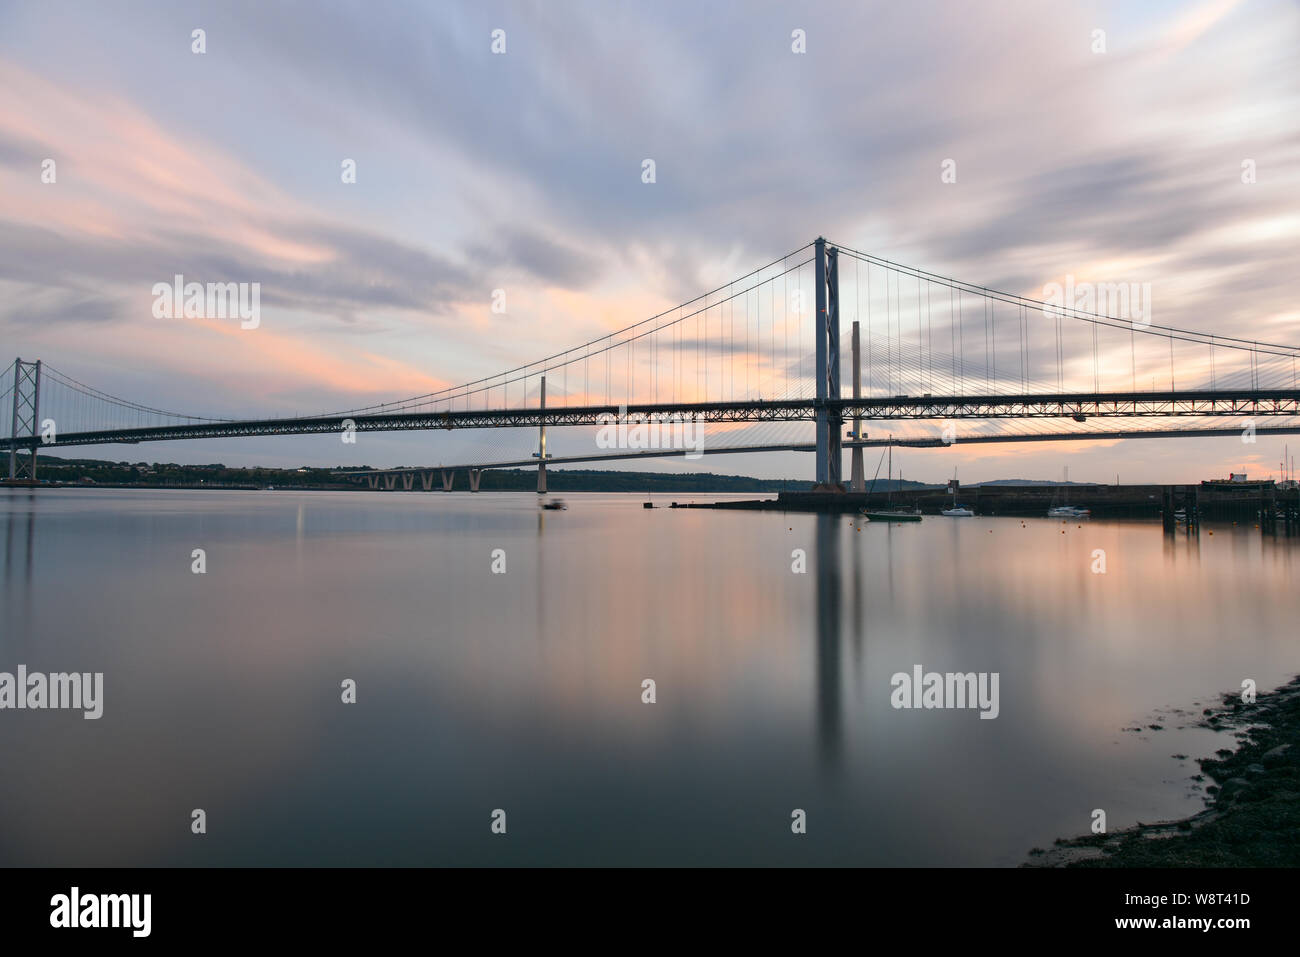 View of Forth Road Bridge and Queensferry Crossing motorway bridge across the Firth of Forth at dusk Stock Photo